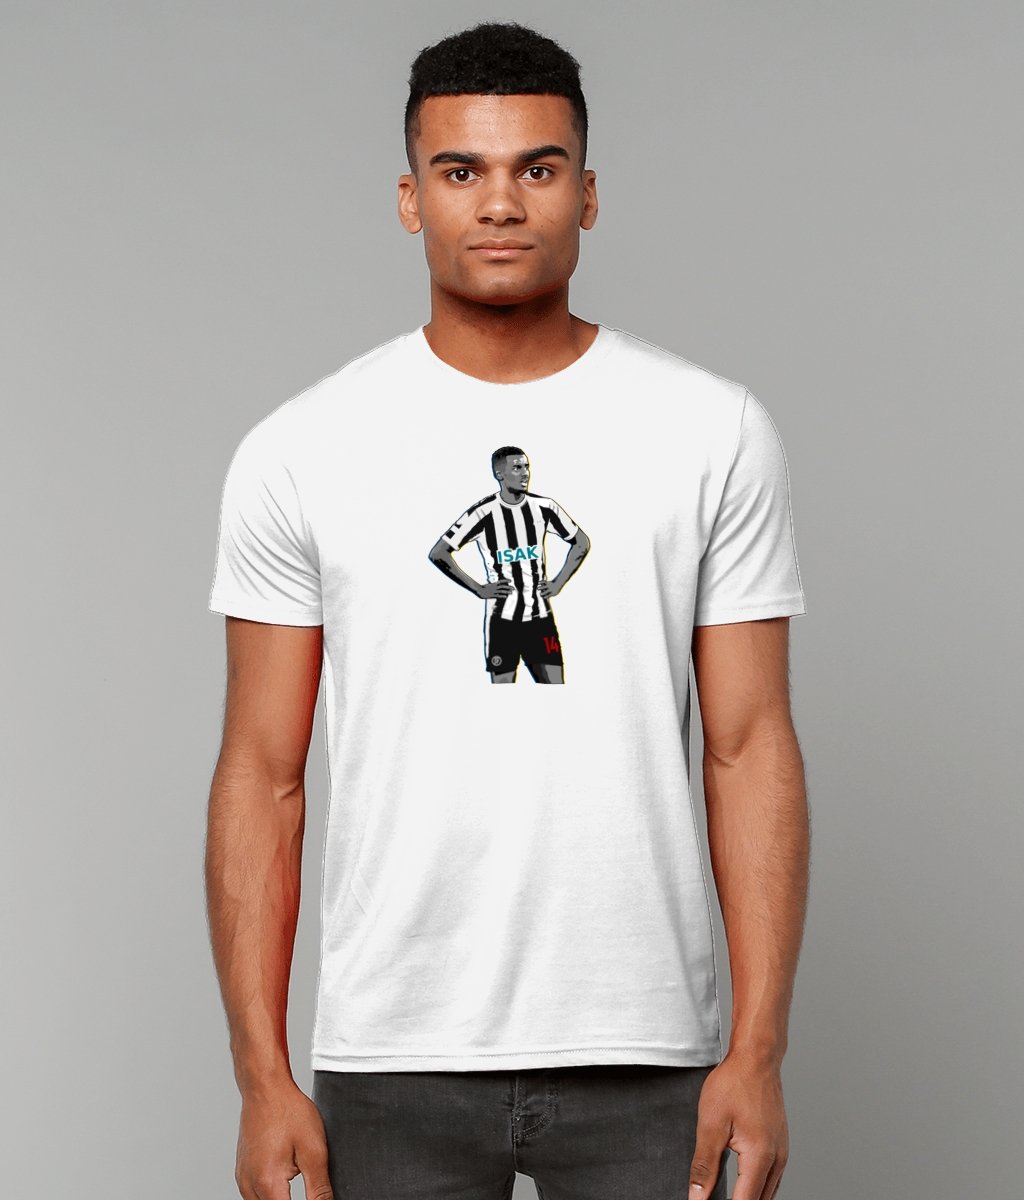 Isak Cold Celebration | NUFC T-Shirt - Football Posters